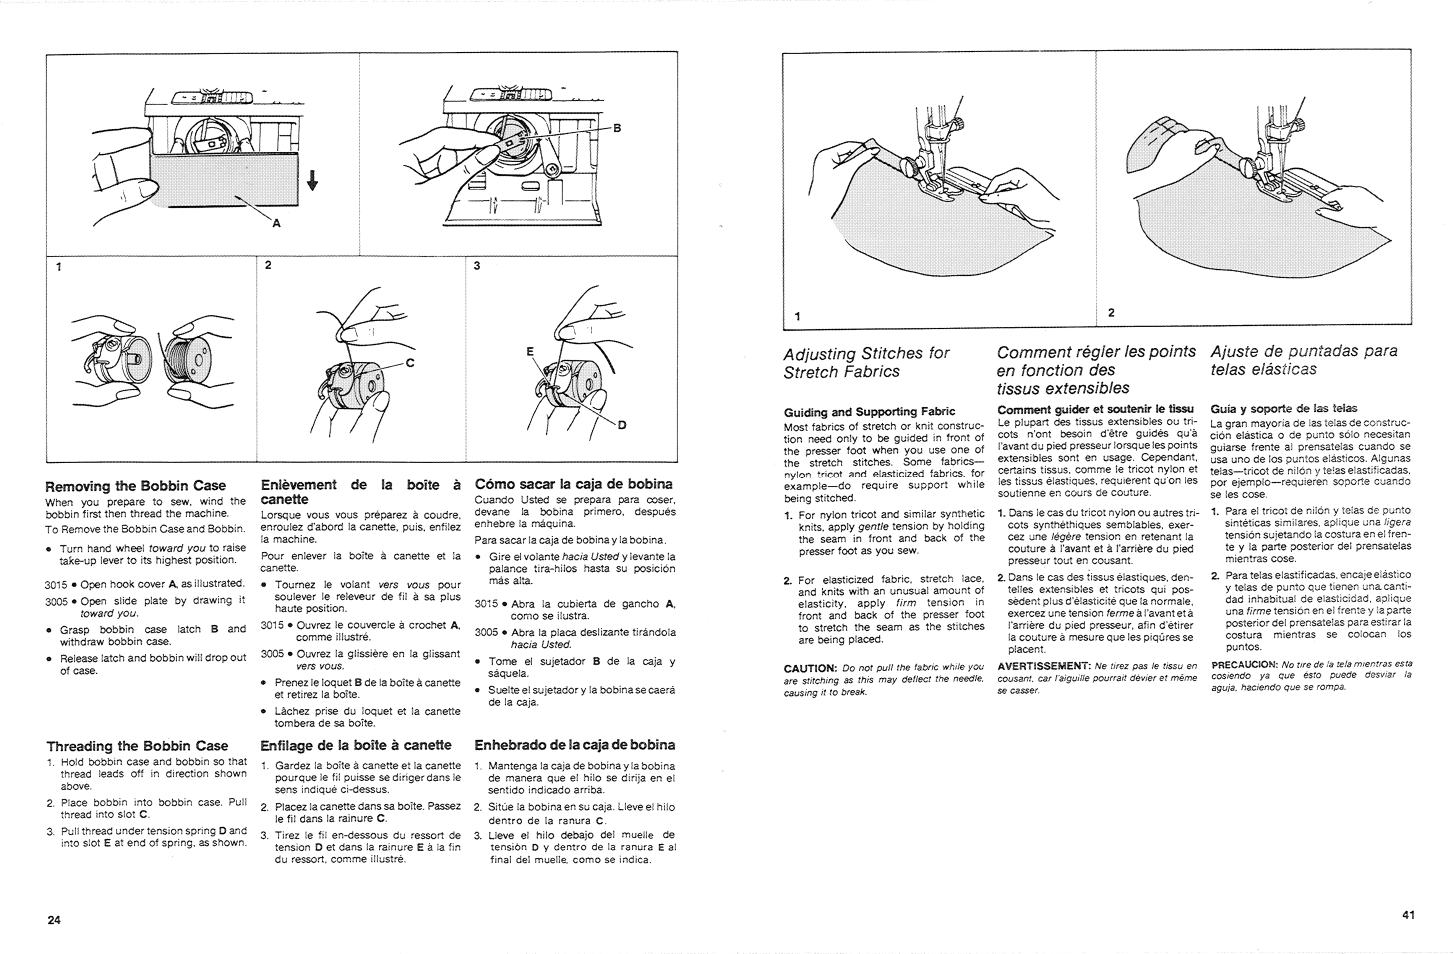 Tissus extensibles, Comment guider et soutenir le tissu, Adjusting stitches for stretch fabrics | SINGER 3015 User Manual | Page 43 / 68